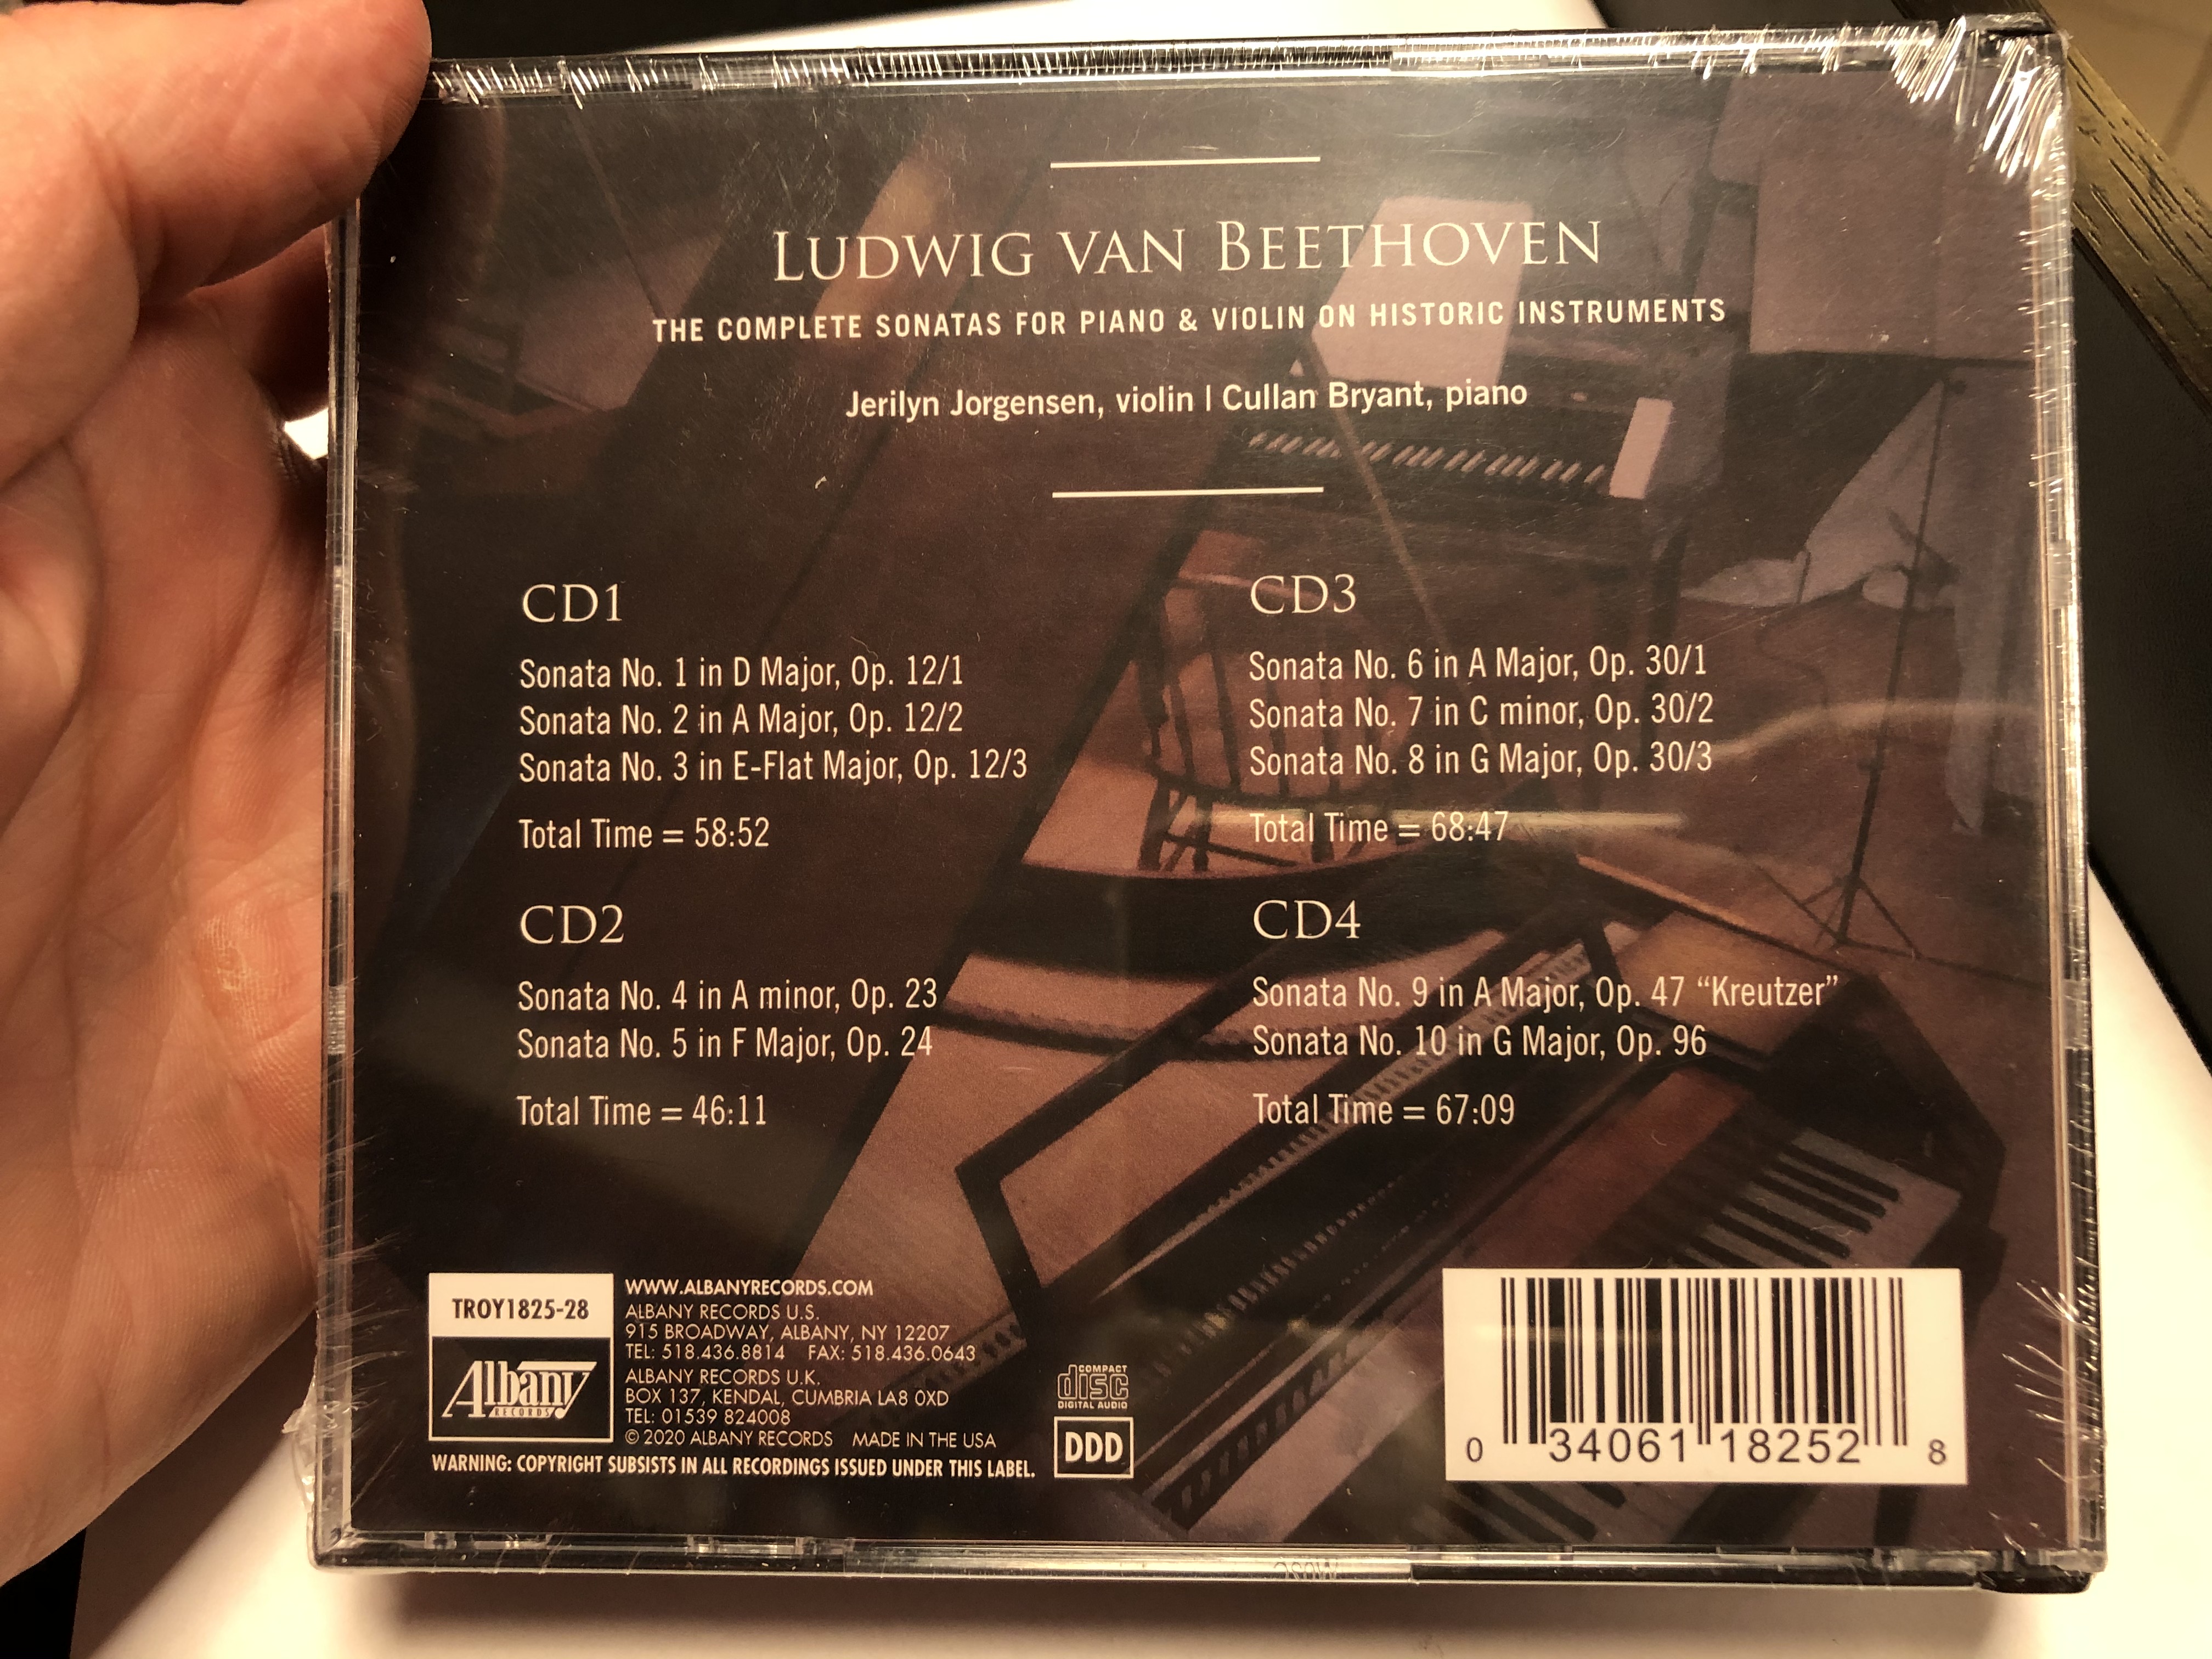 ludwig-van-beethoven-the-complete-sonatas-for-piano-violin-on-historic-instruments-jerilyn-jorgensen-violin-cullan-bryant-piano-albany-records-audio-cd-2020-troy1825-28-2-.jpg